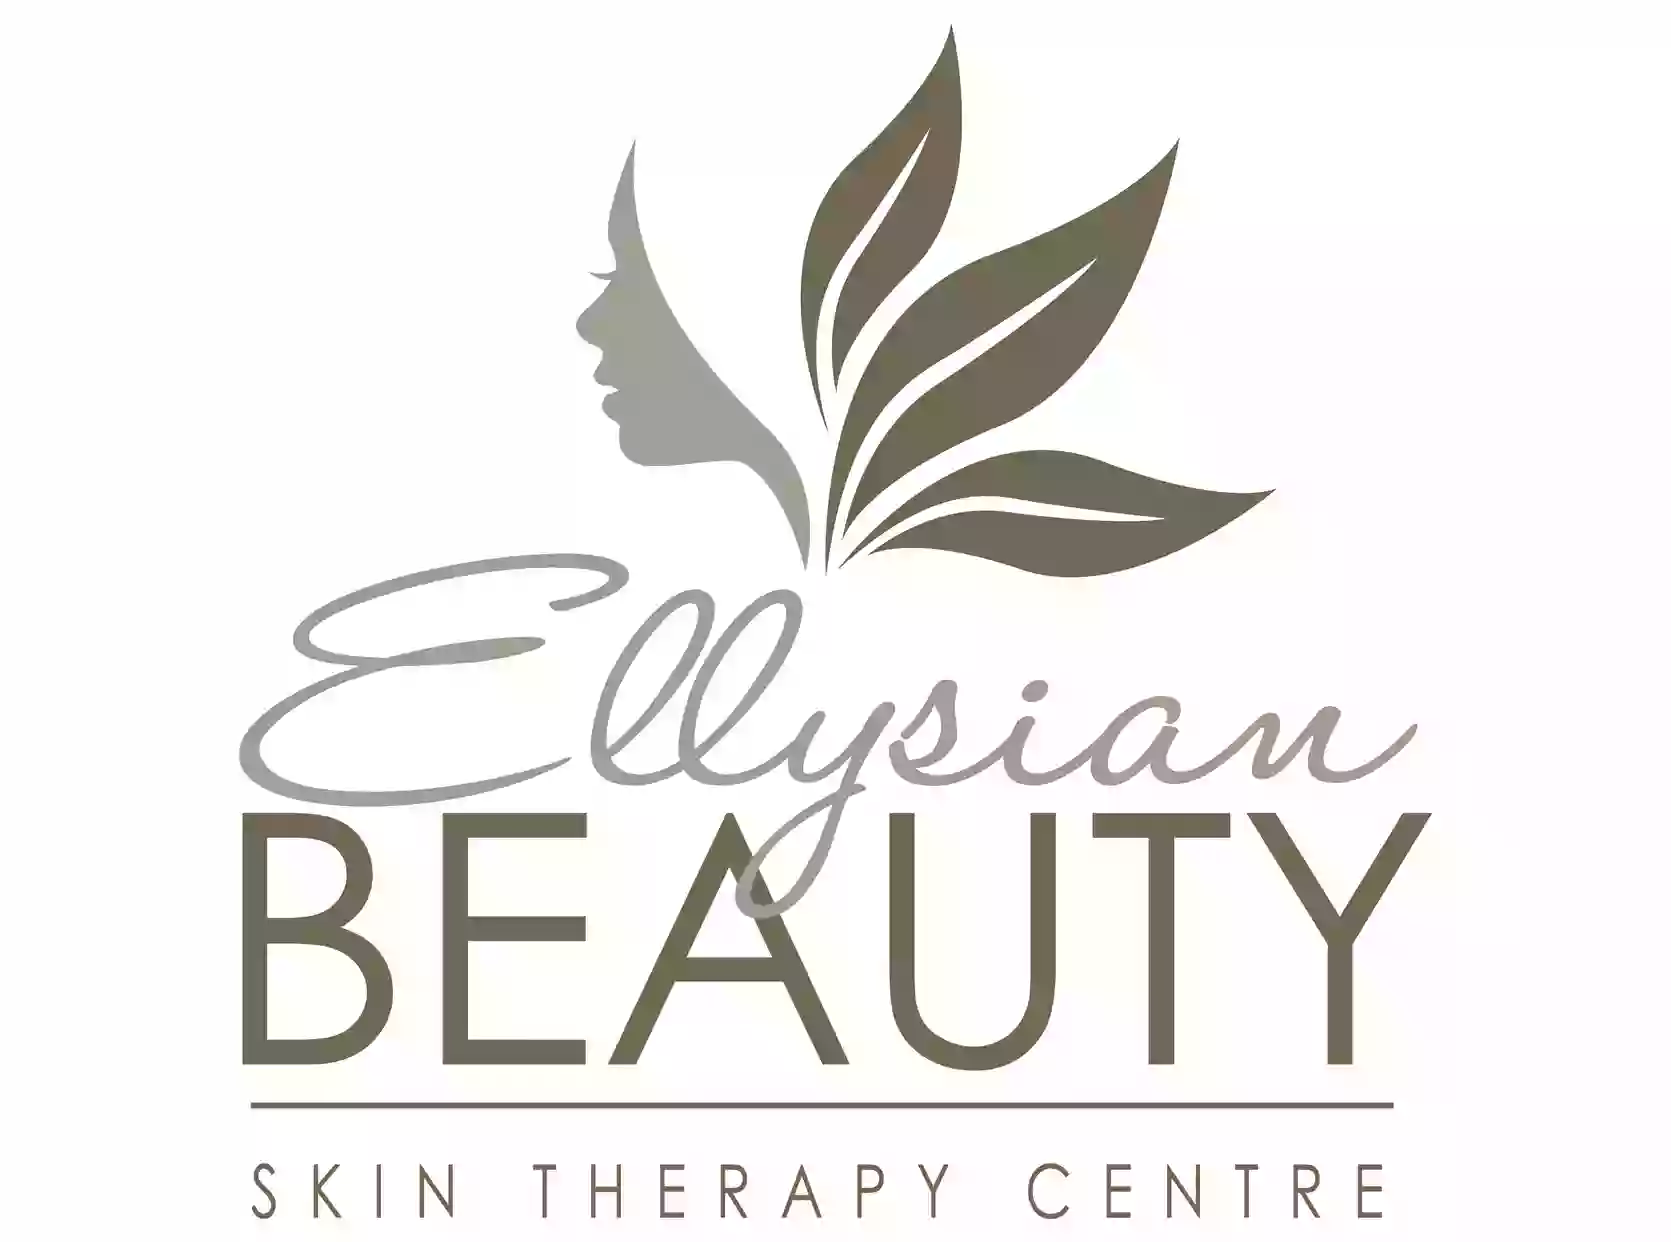 Ellysian Beauty Skin Therapy Centre